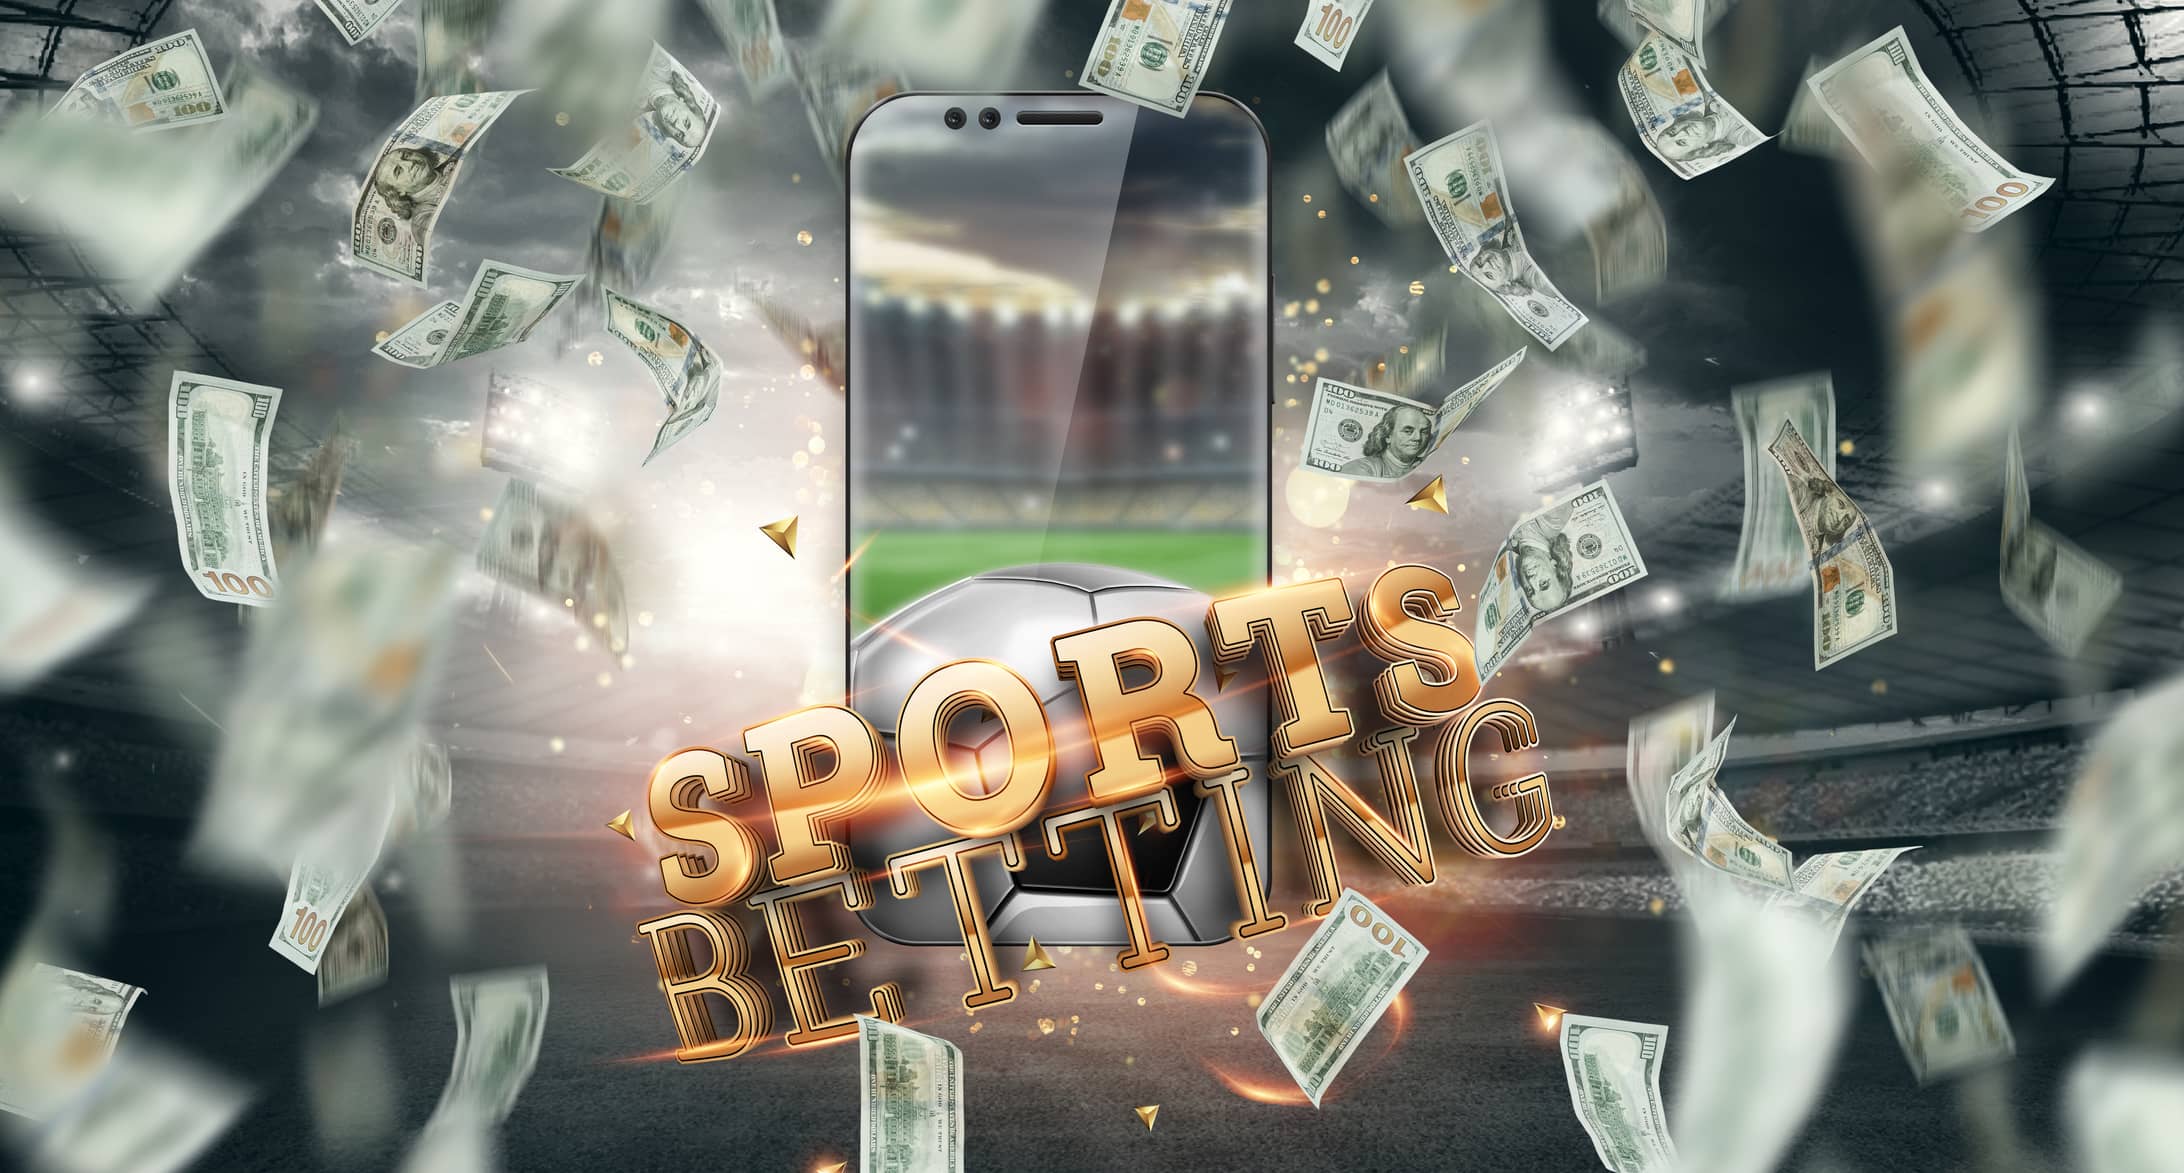 Michigan's Online Betting & Gaming Undergoes Historic Debut Topping $115-M  in Sports Bets | Moody on the Market